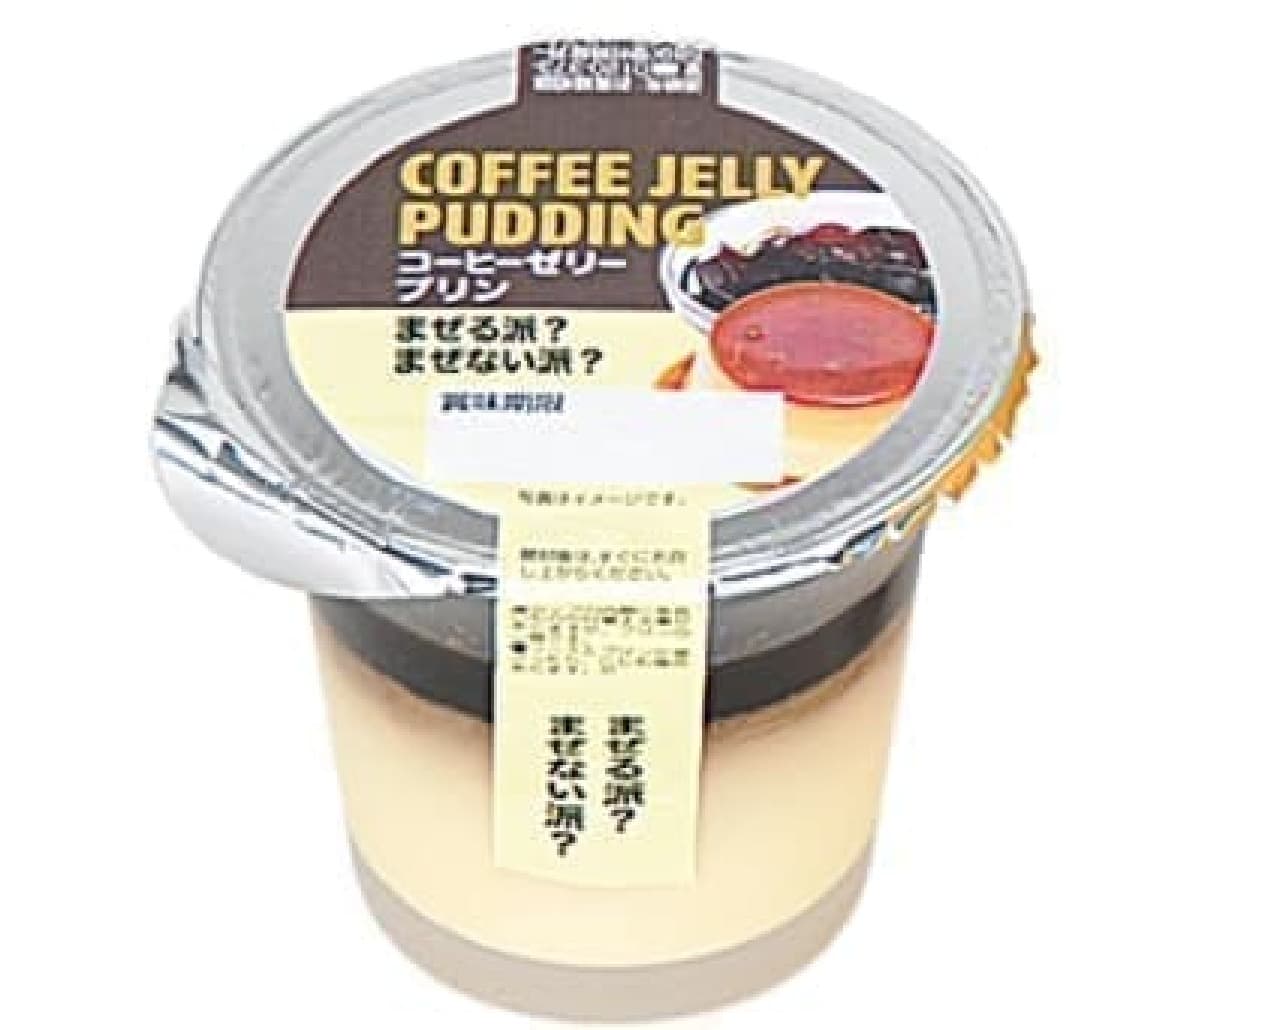 And Glory Coffee Jelly Pudding 90g